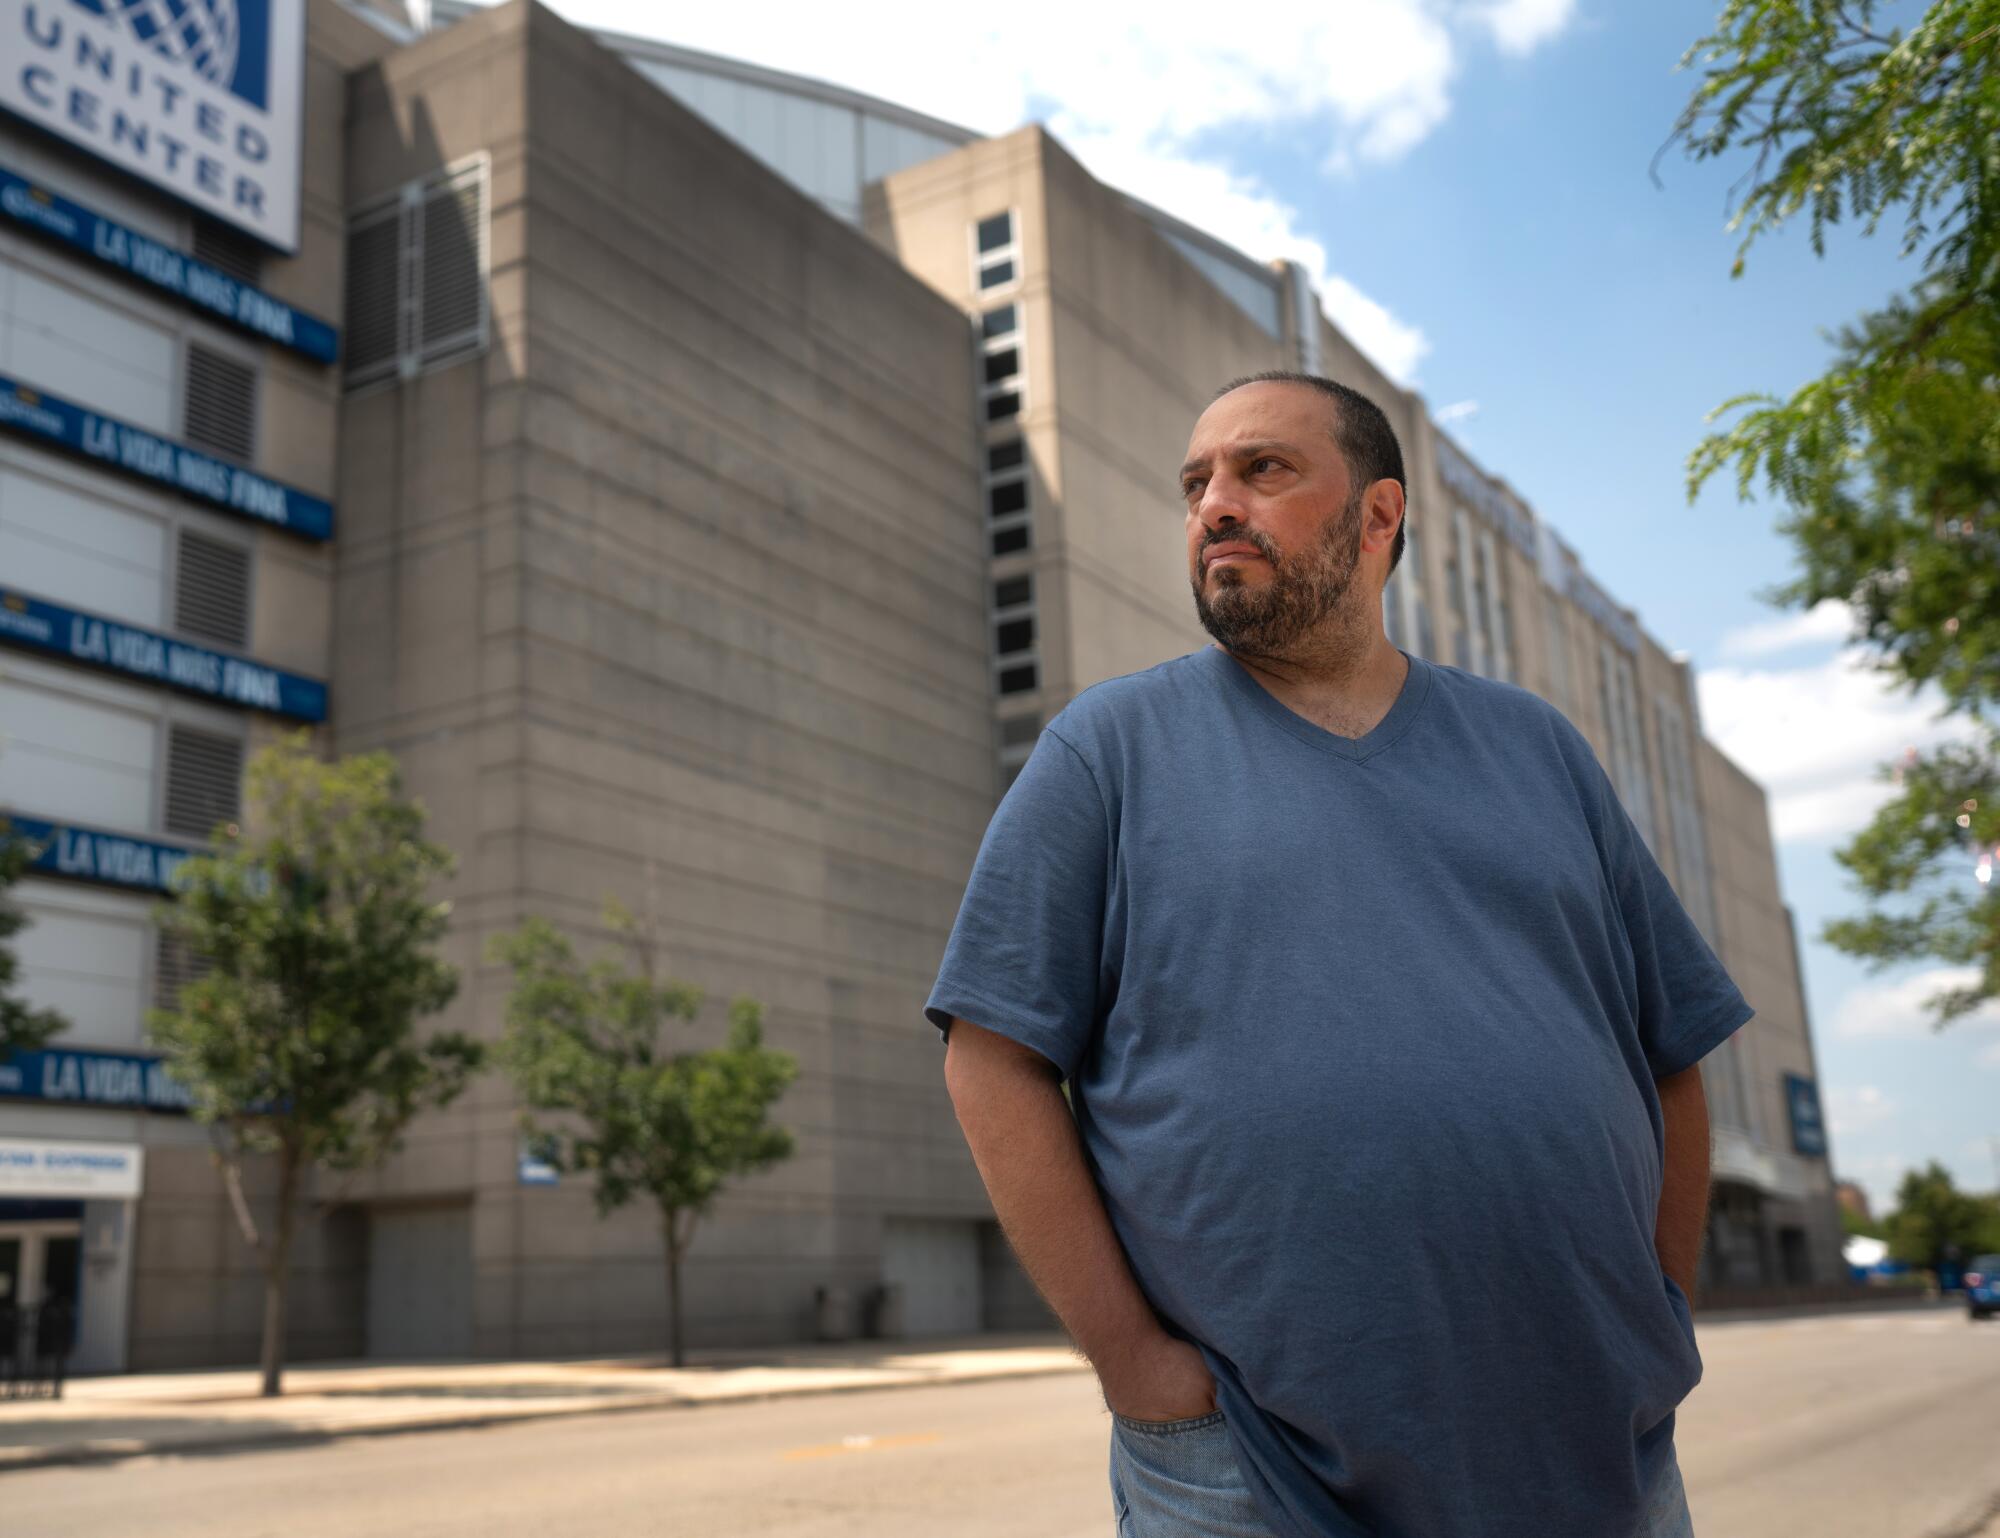 A man in a blue T-shirt stands outside the United Center in Chicago